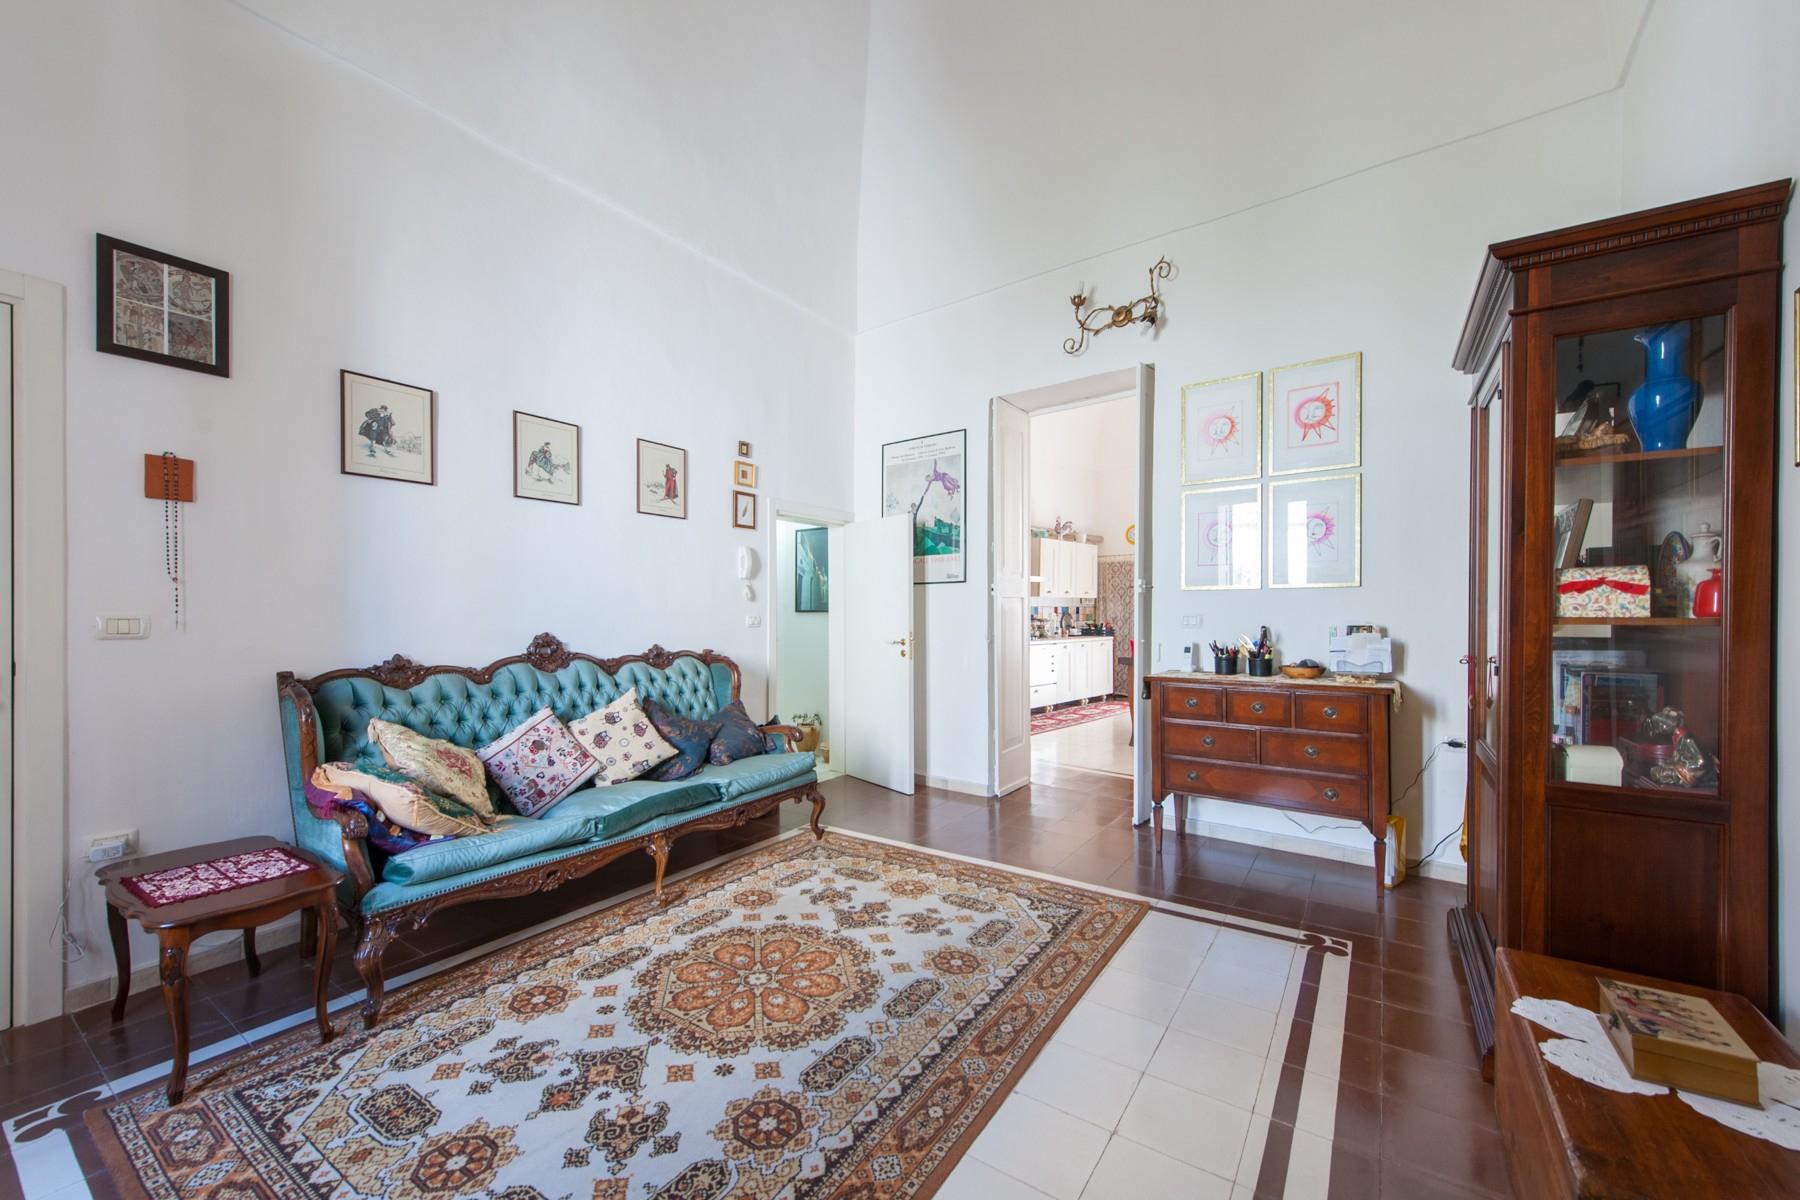 Perfectly renovated Palazzetto in the historic center of Parabita - 6